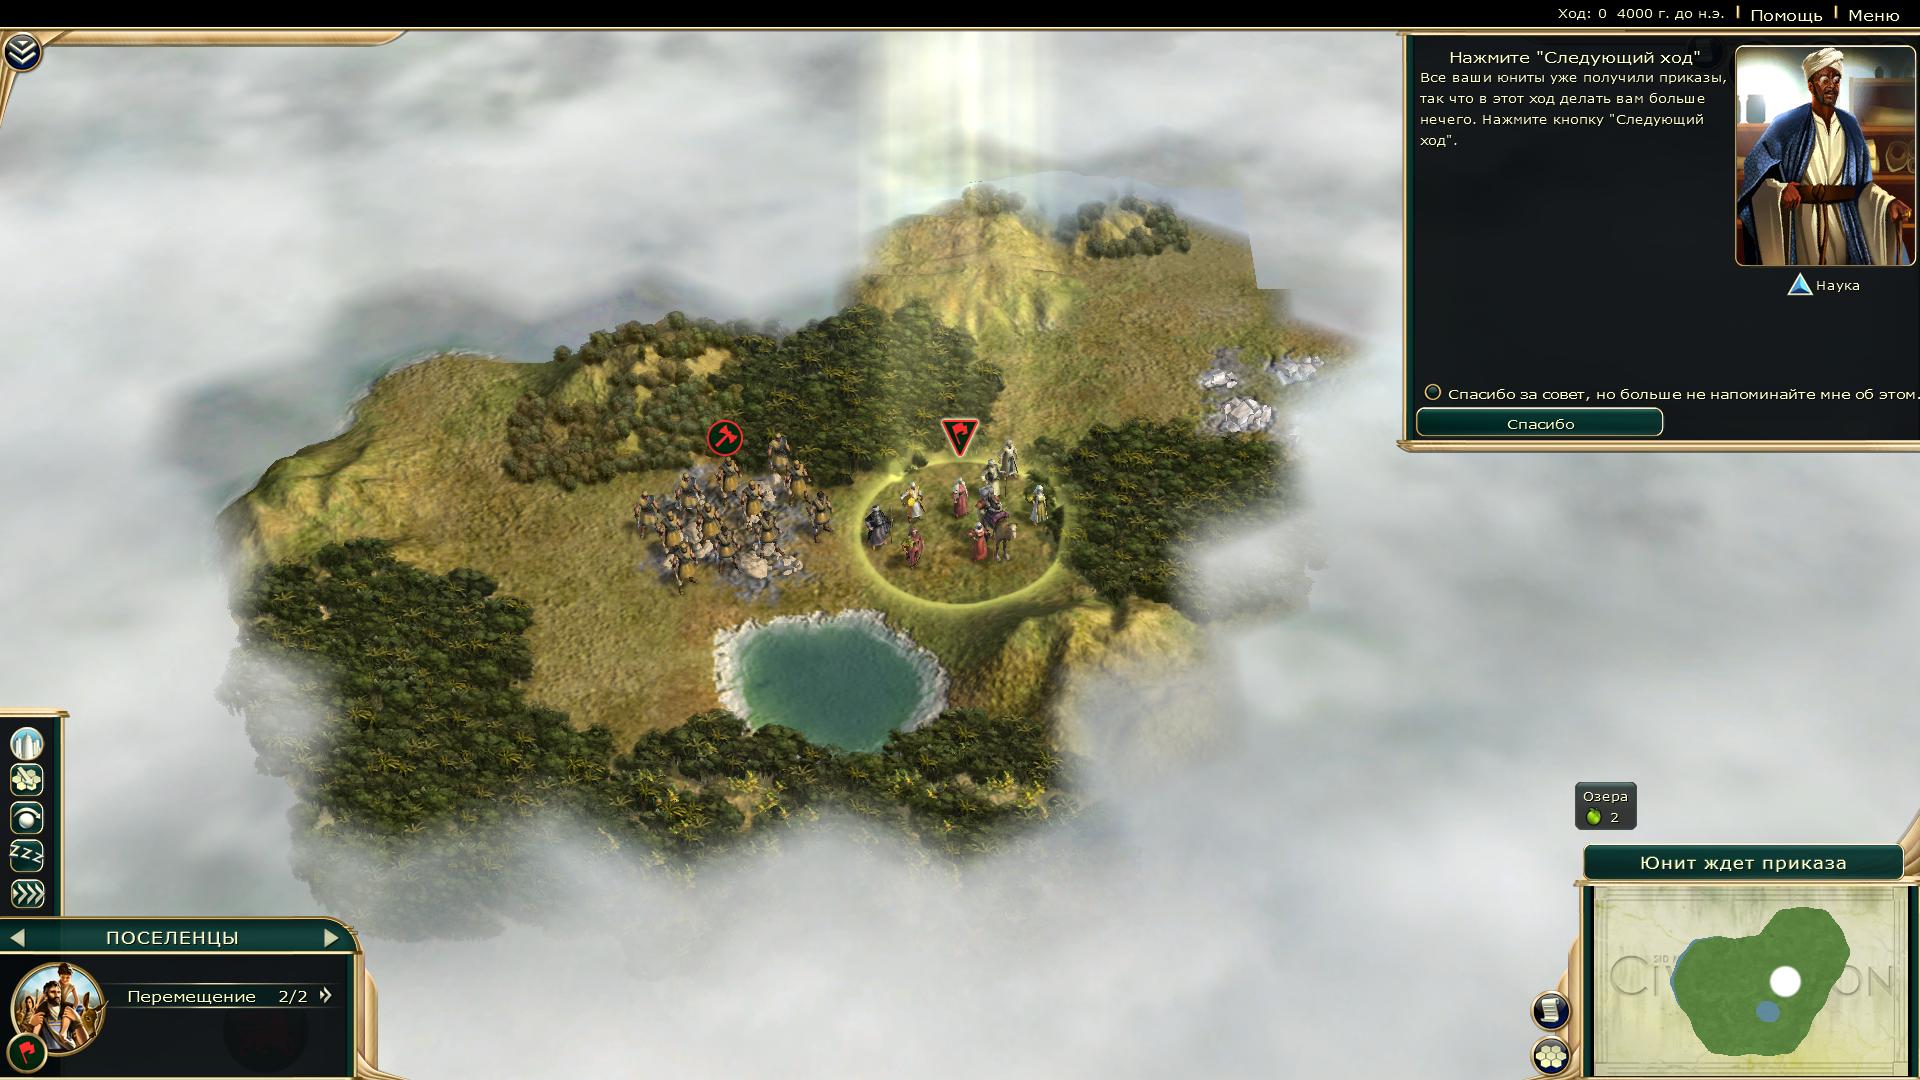 civilization v brave new world game of the year edition